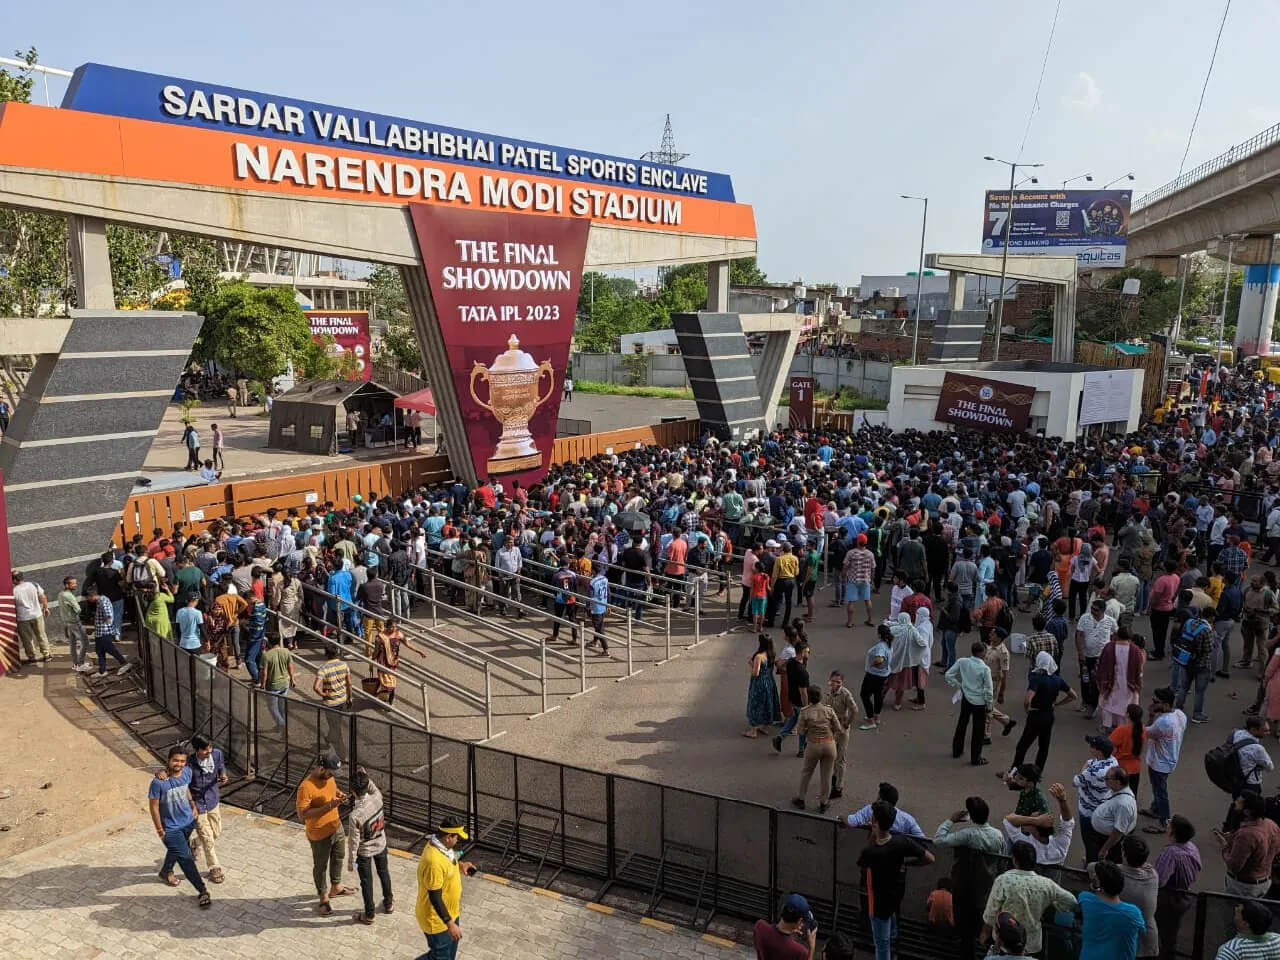 Ticketing chaos for the final game of the Indian Premier League 2023 at Narendra Modi Stadium